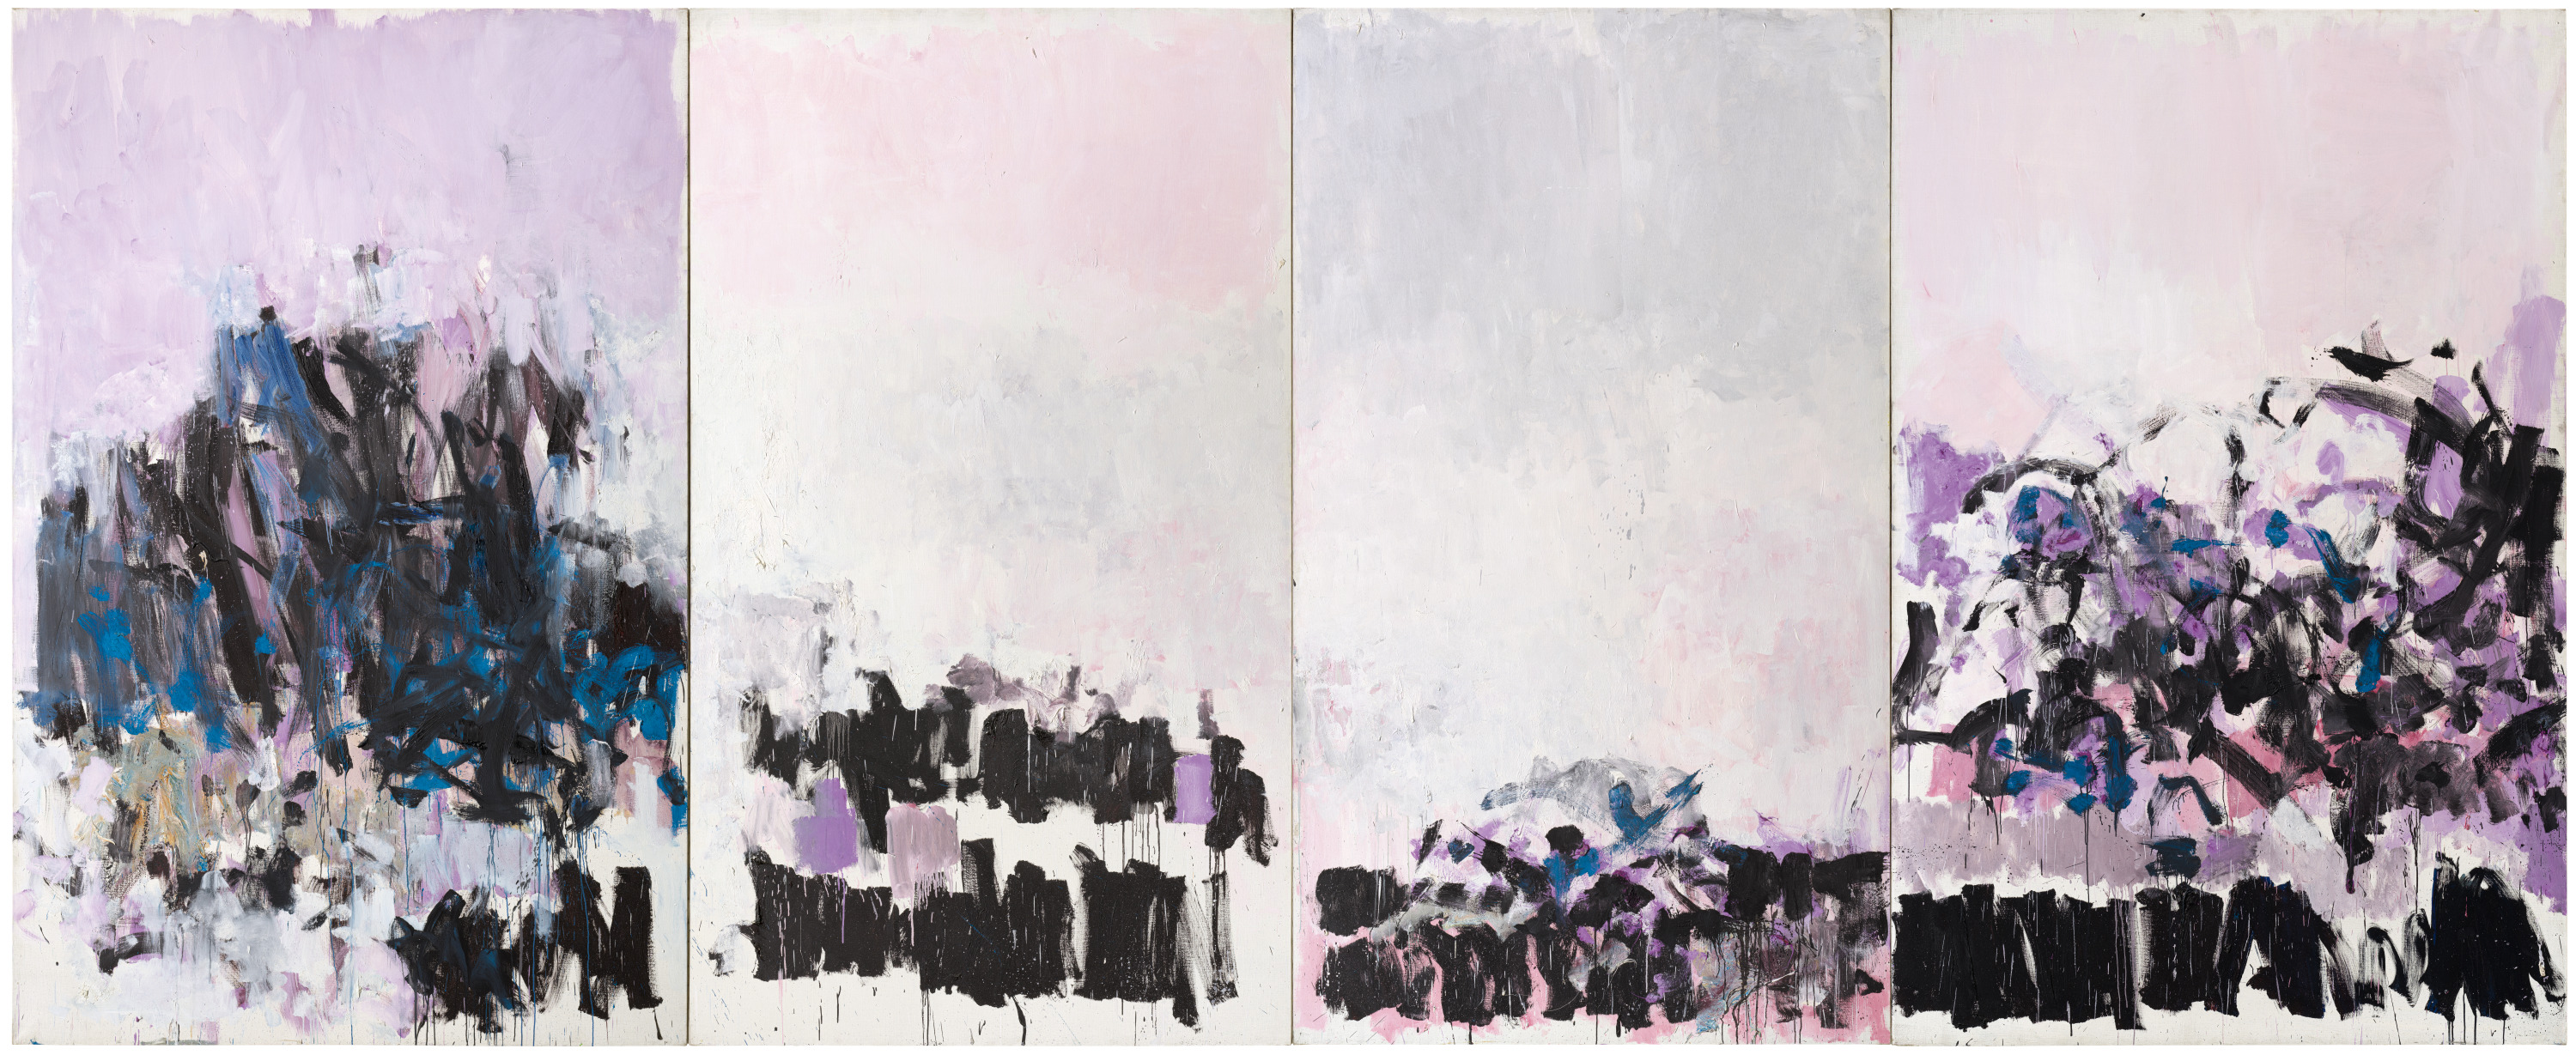 Joan Mitchell, ‘La Vie en Rose,’ 1979. Lent by the Metropolitan Museum of Art, anonymous gift and purchase, George A. Hearn Fund, by exchange, 1991 (1991.139a-d). © Estate of Joan Mitchell